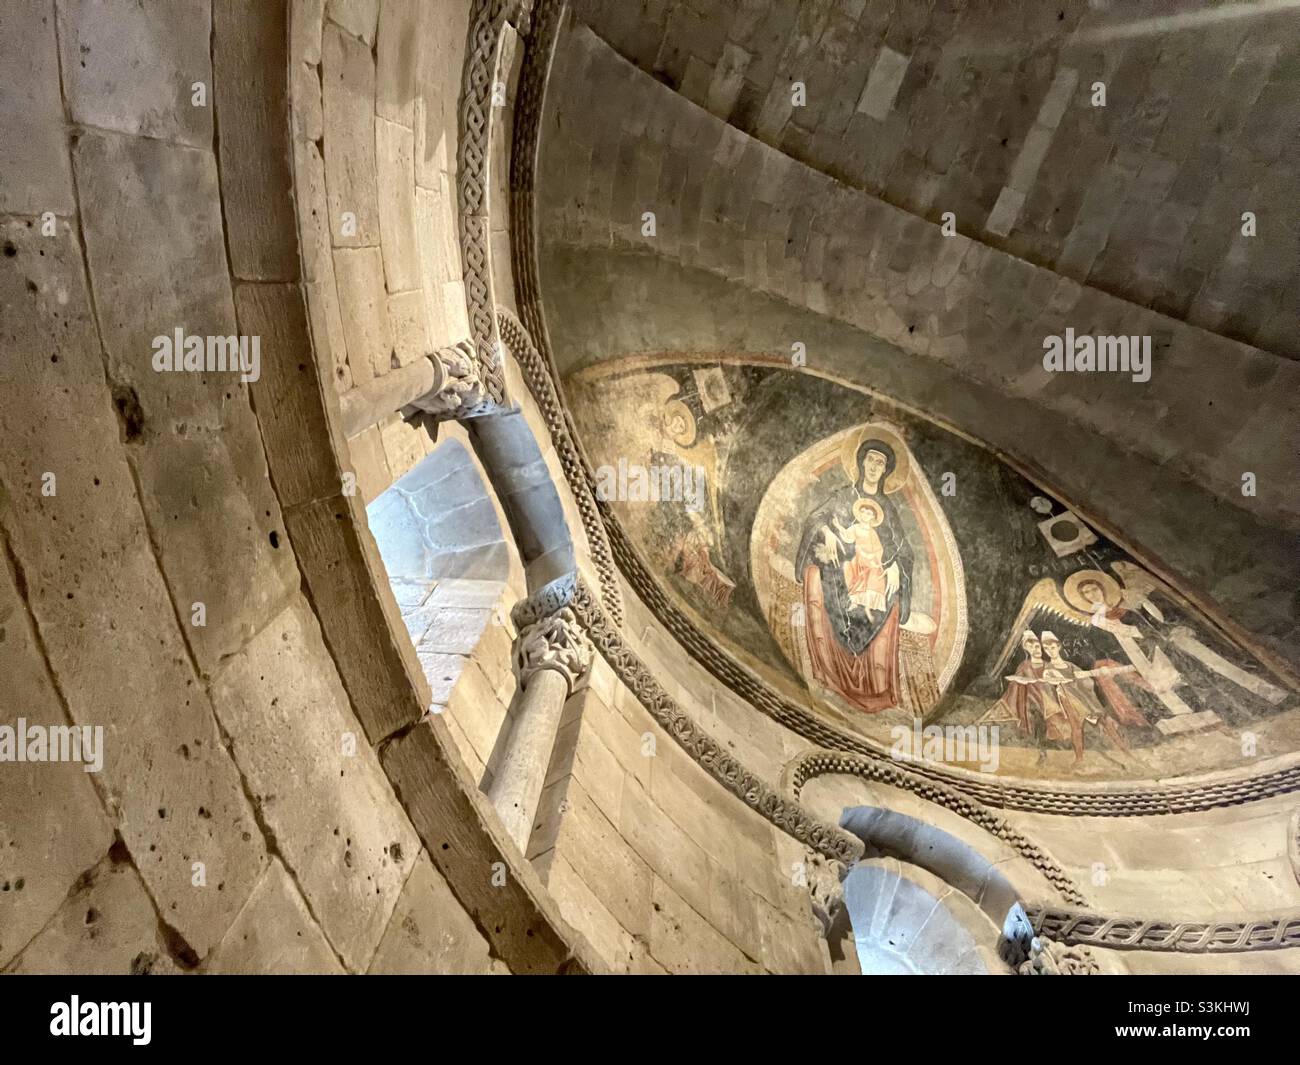 Looking up at the ceiling paintings, The Cloisters, NY Stock Photo